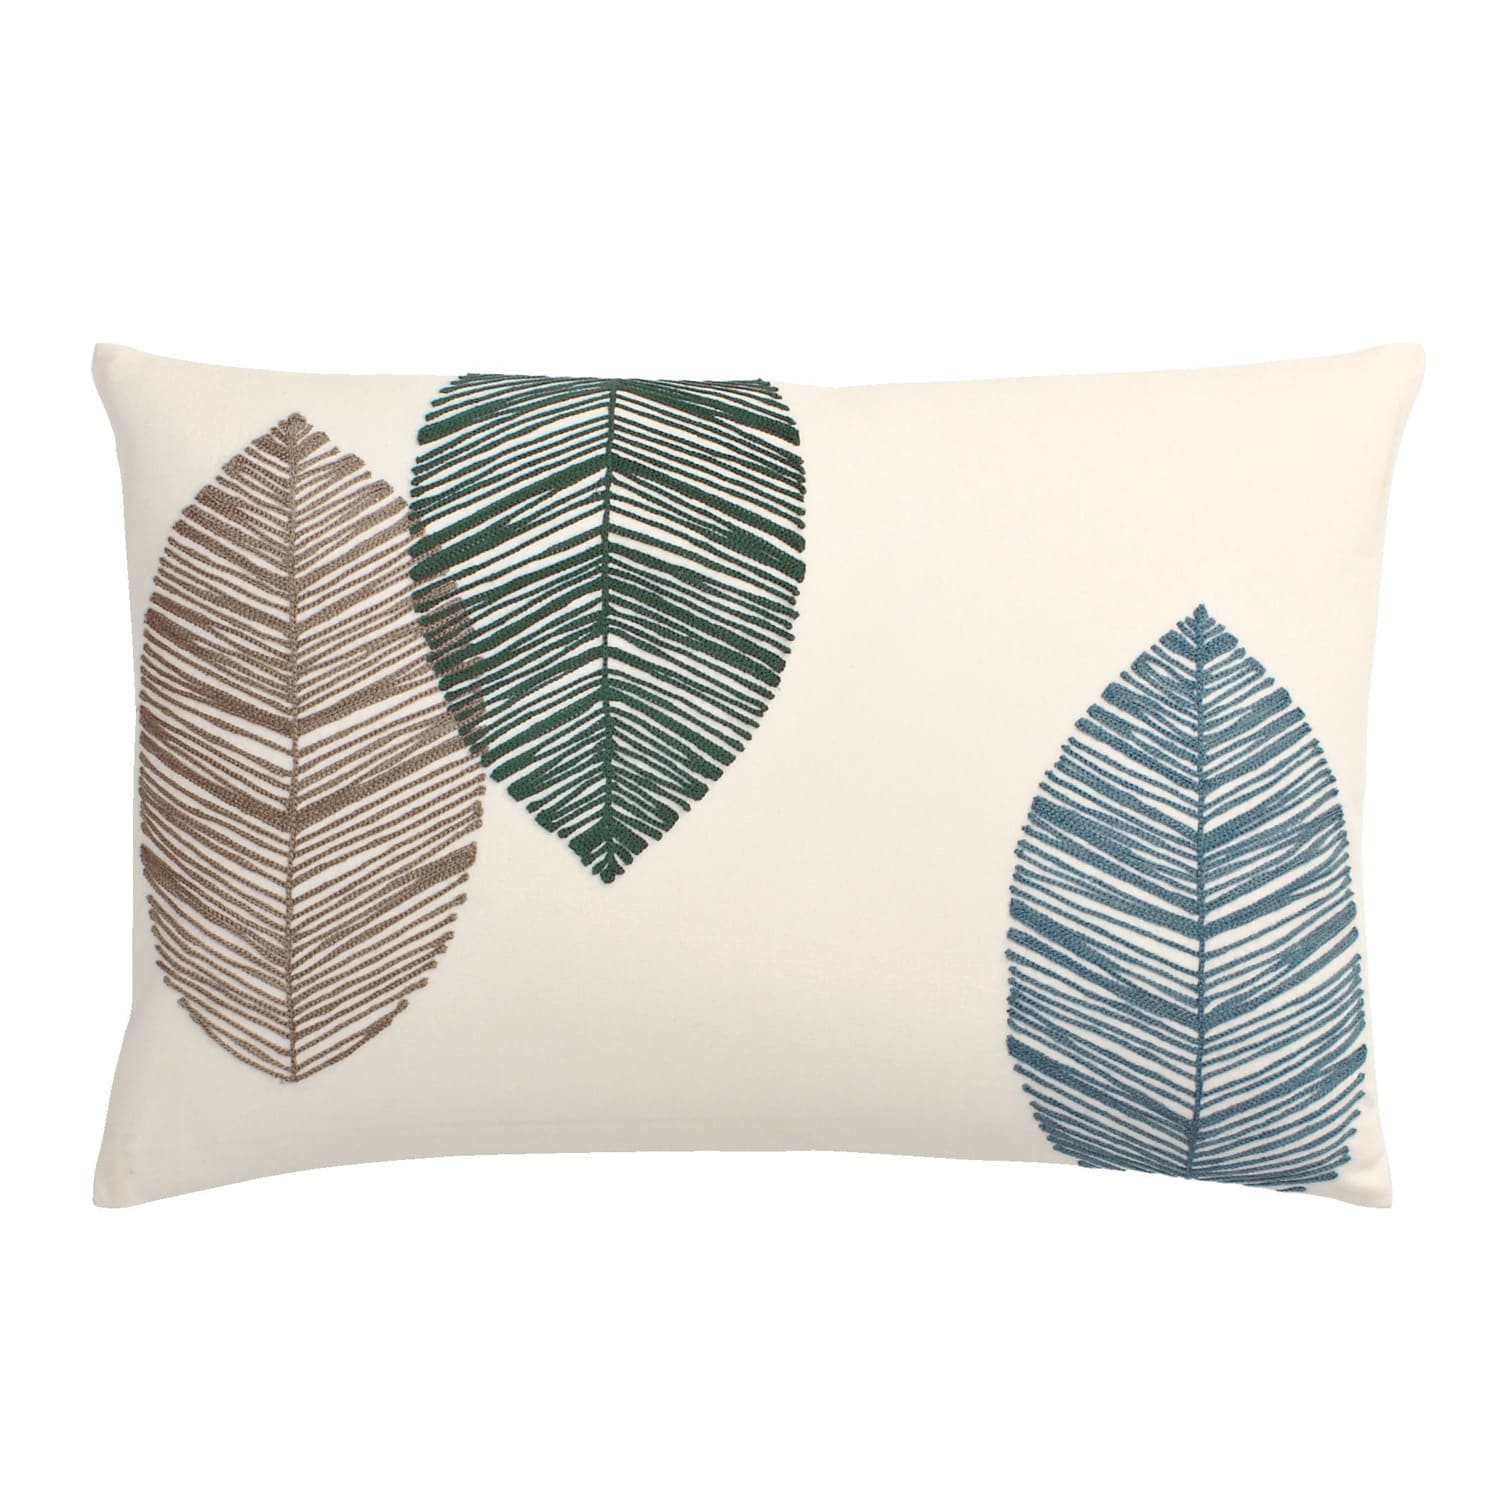 Cstudio Home Leaves Embroidered Pillow Covers